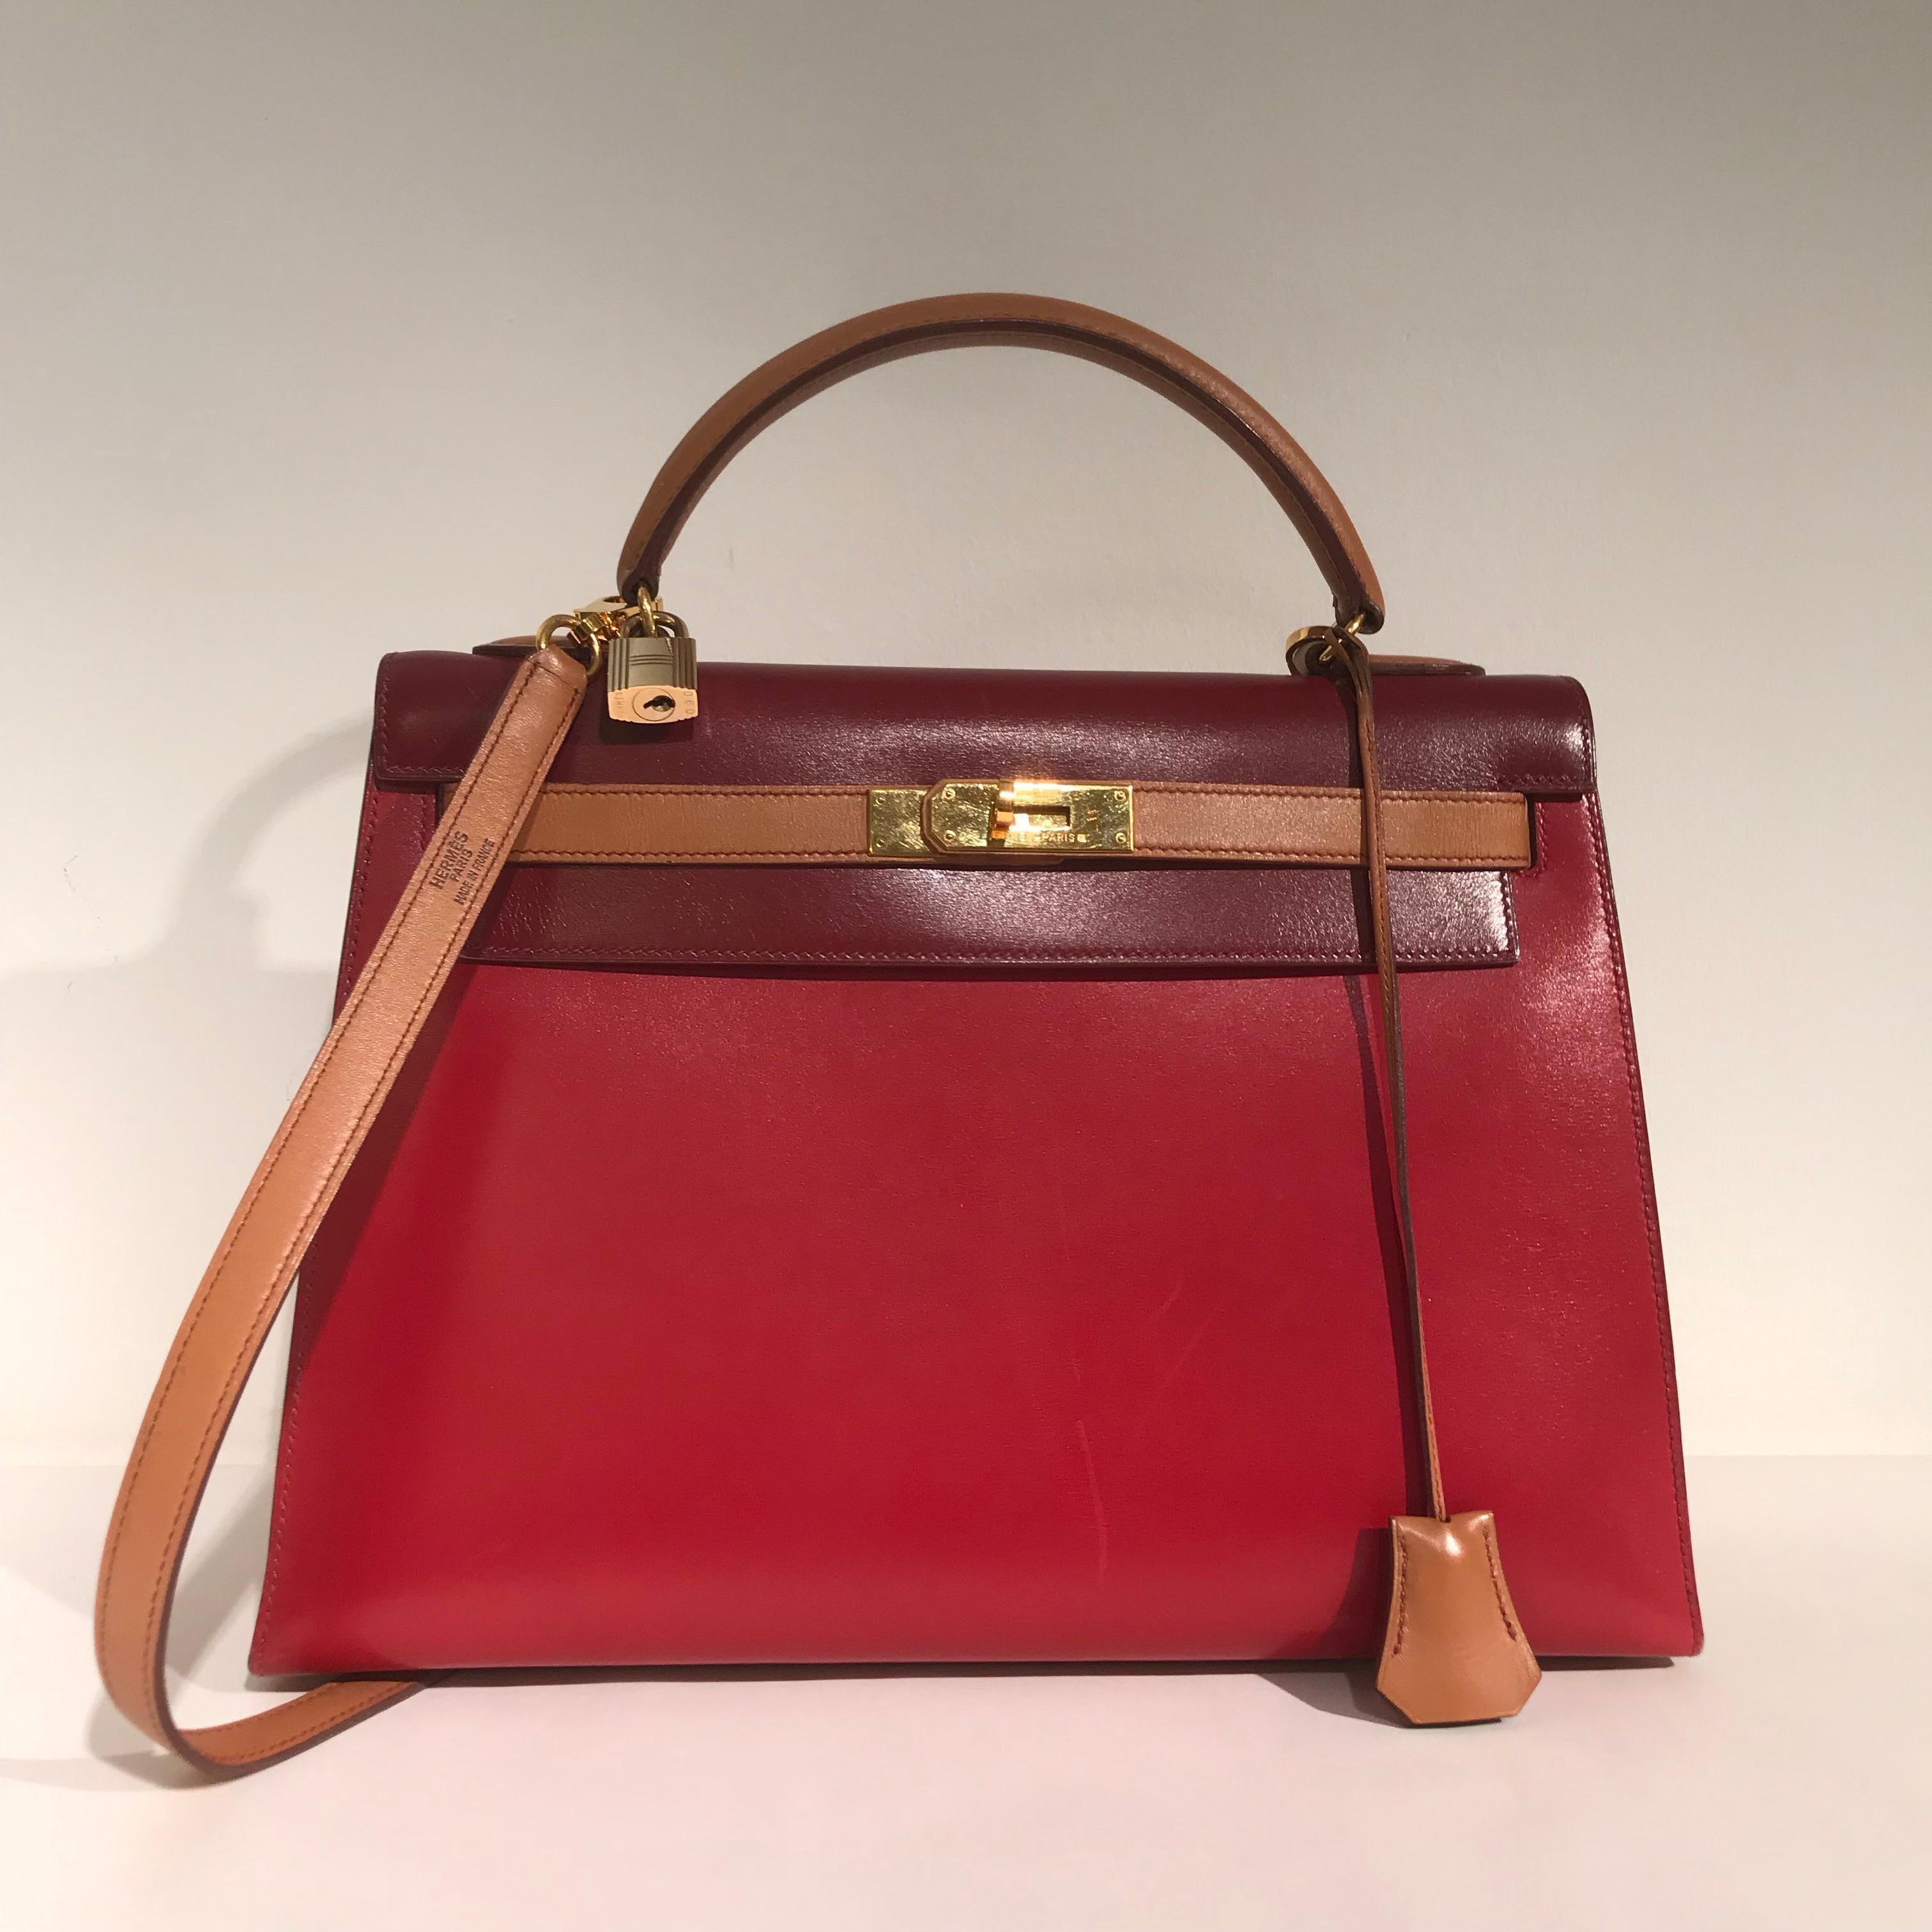 French Hermes Tricolor Kelly Bag